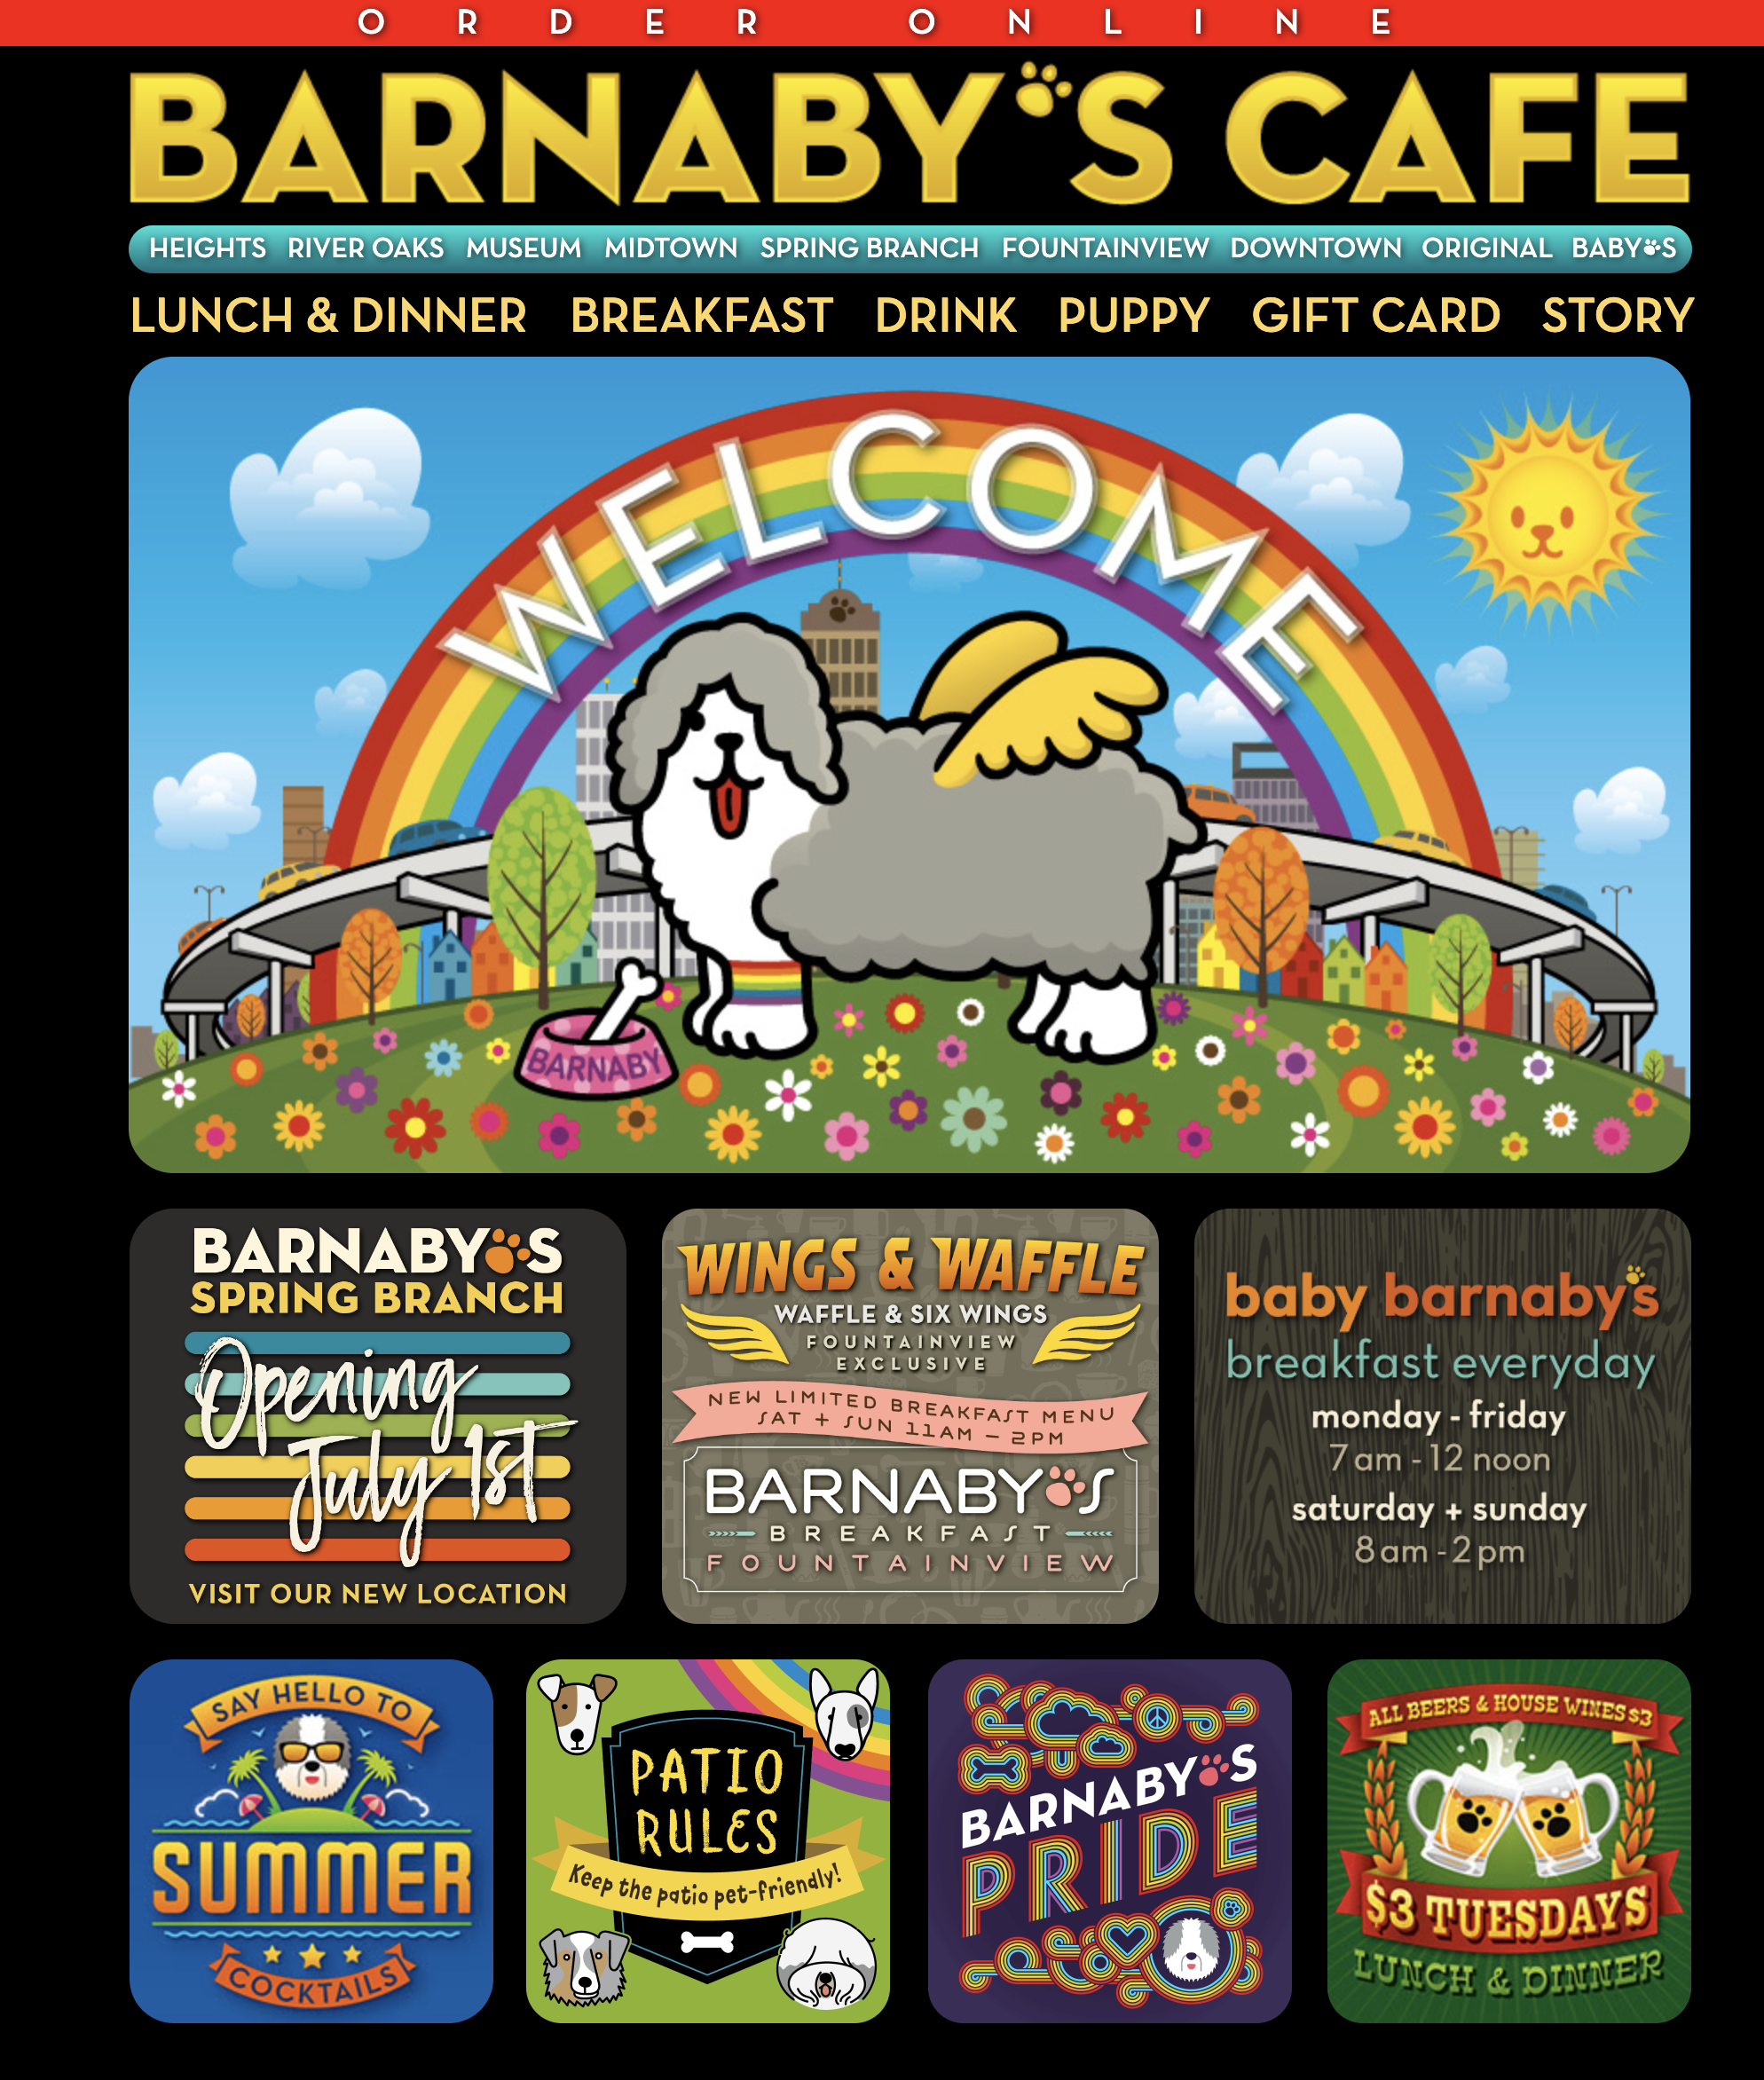 Barnaby's Cafe is a favorite kid friendly restaurant in Houston